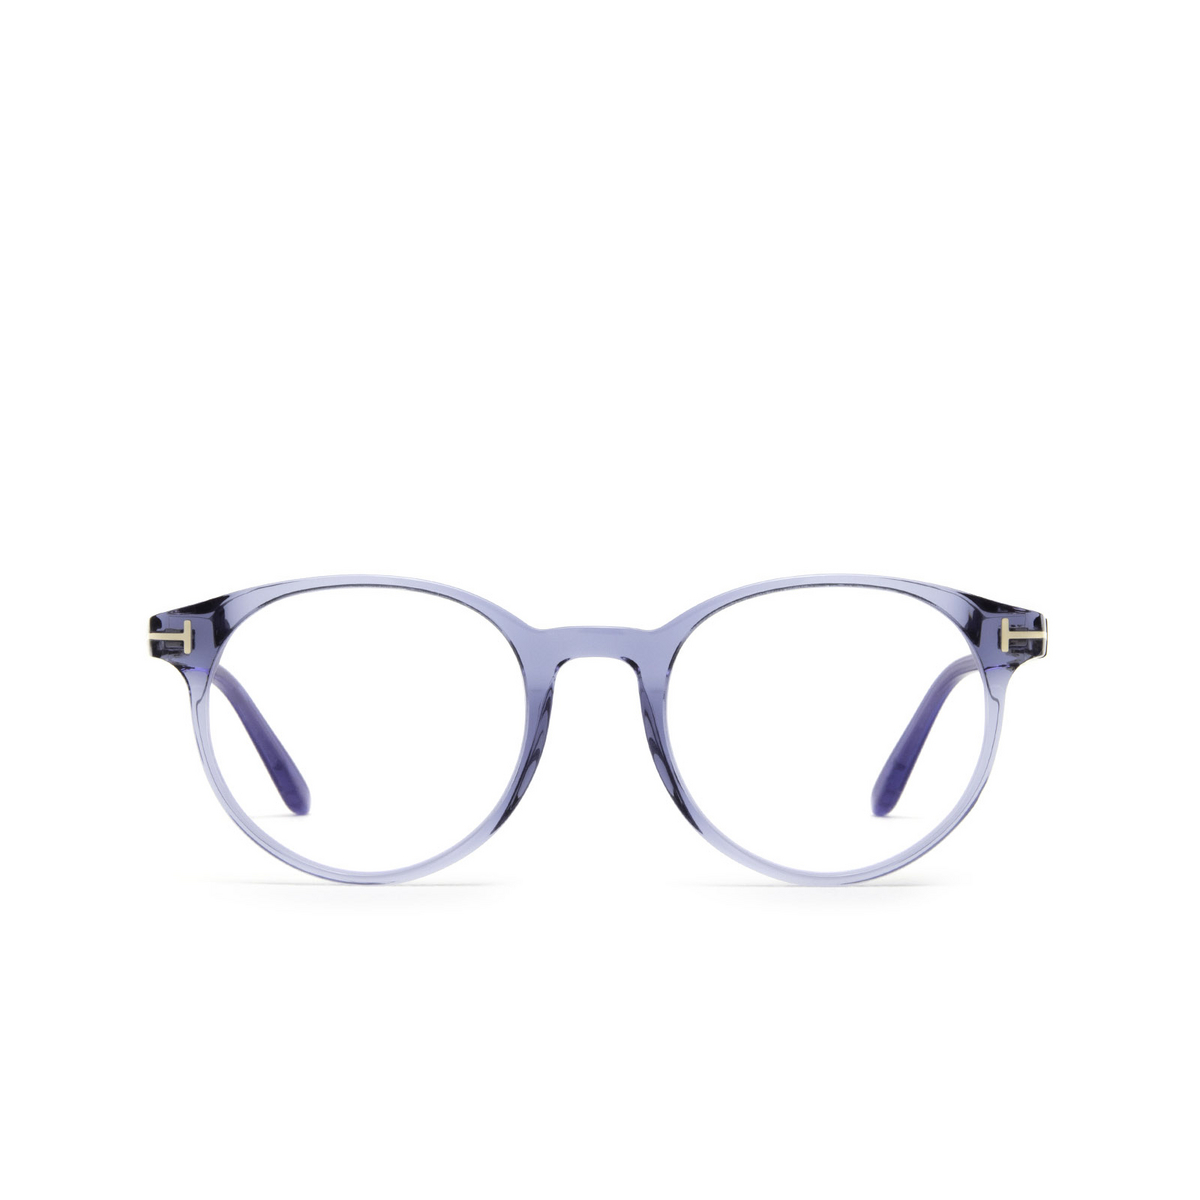 Tom Ford® Round Eyeglasses: FT5695-B color 090 Blue - front view